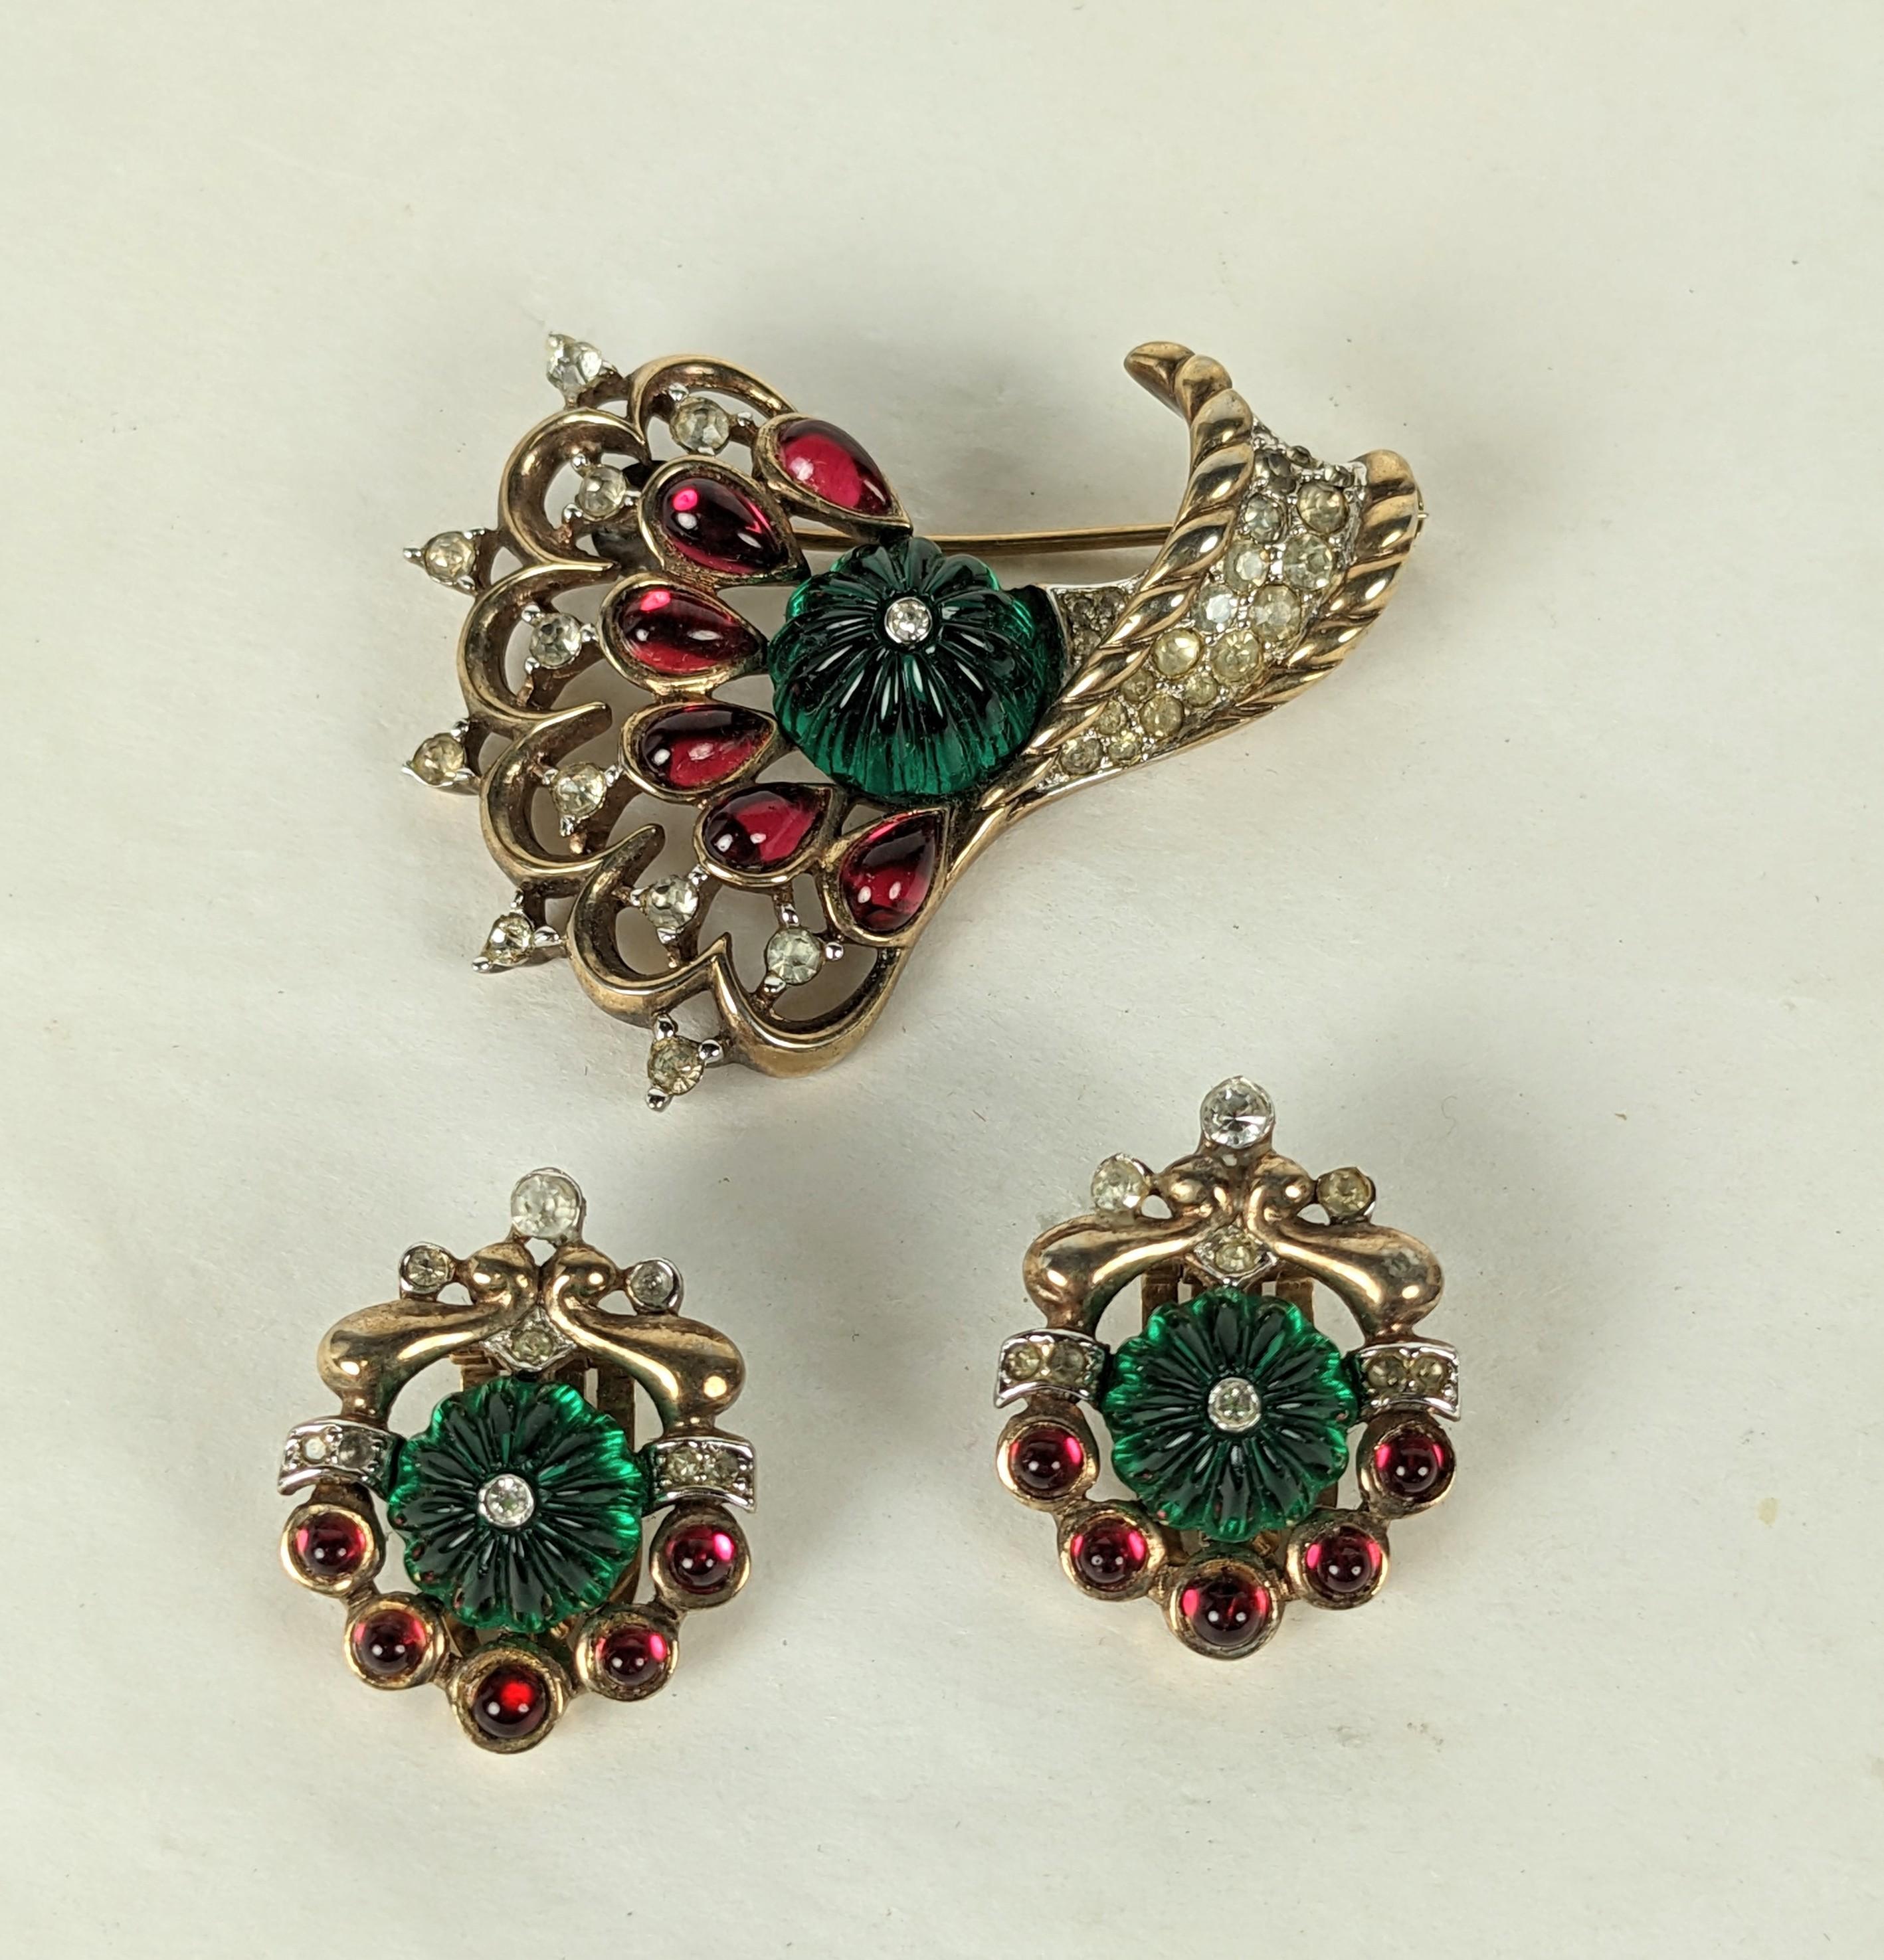 Trifari Jewels of India Moghul Set circa 1949 by Alfred Phillipe. Scroll brooch with pave accents with matching clip earrings. Fluted faux emeralds with ruby pears shaped stones in rose gold plate.
Brooch 1.75